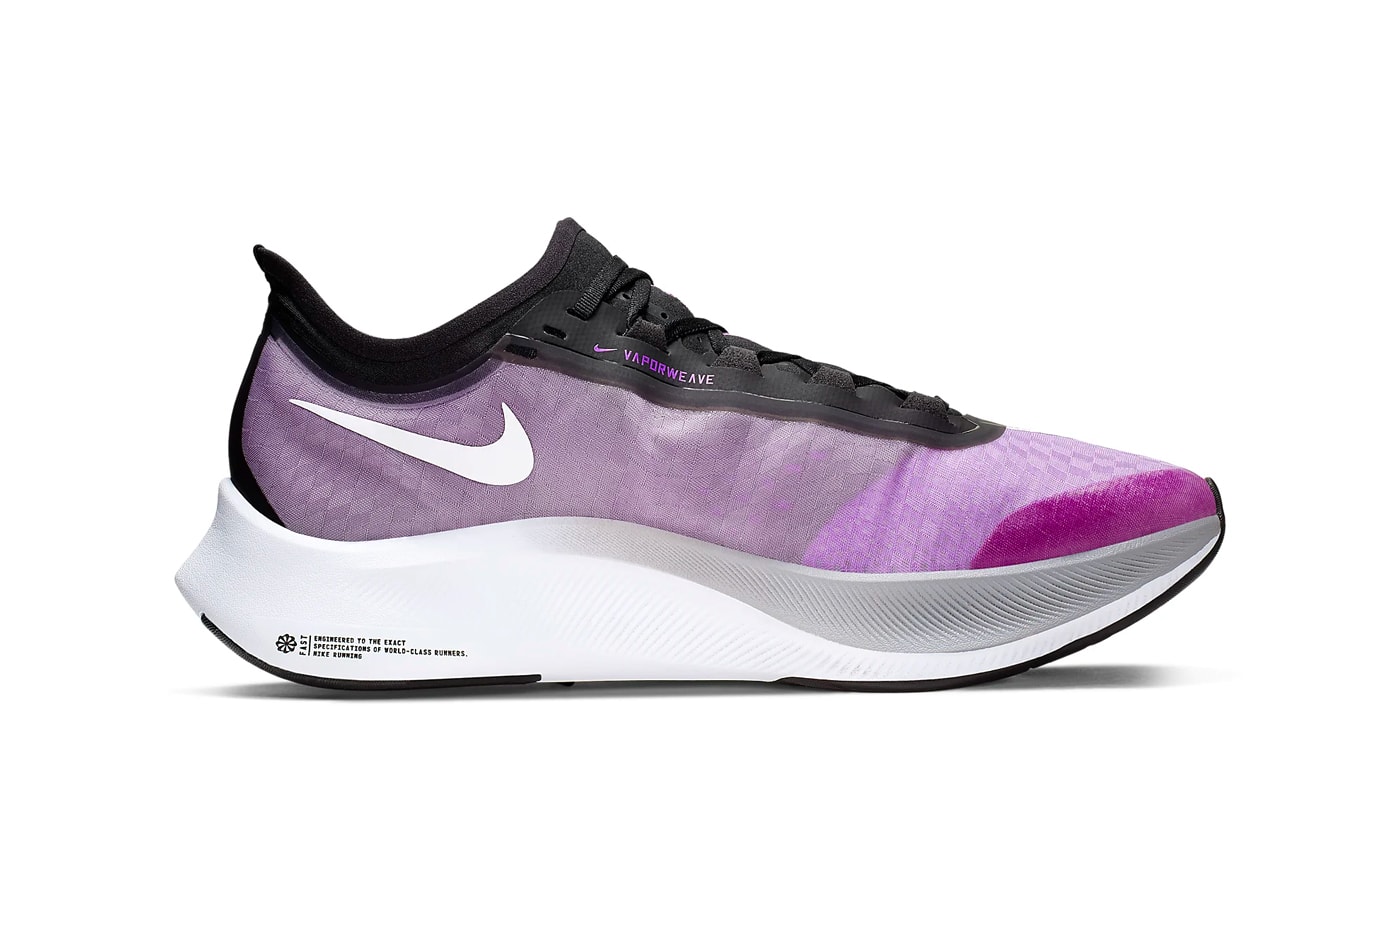 Nike Zoom Fly 3 Racer Blue Wolf Grey Black Pumice White Atmosphere Grey colorways tpu uppers react midsole vaporweave fastening lacing duo toned colorblock running time stamp